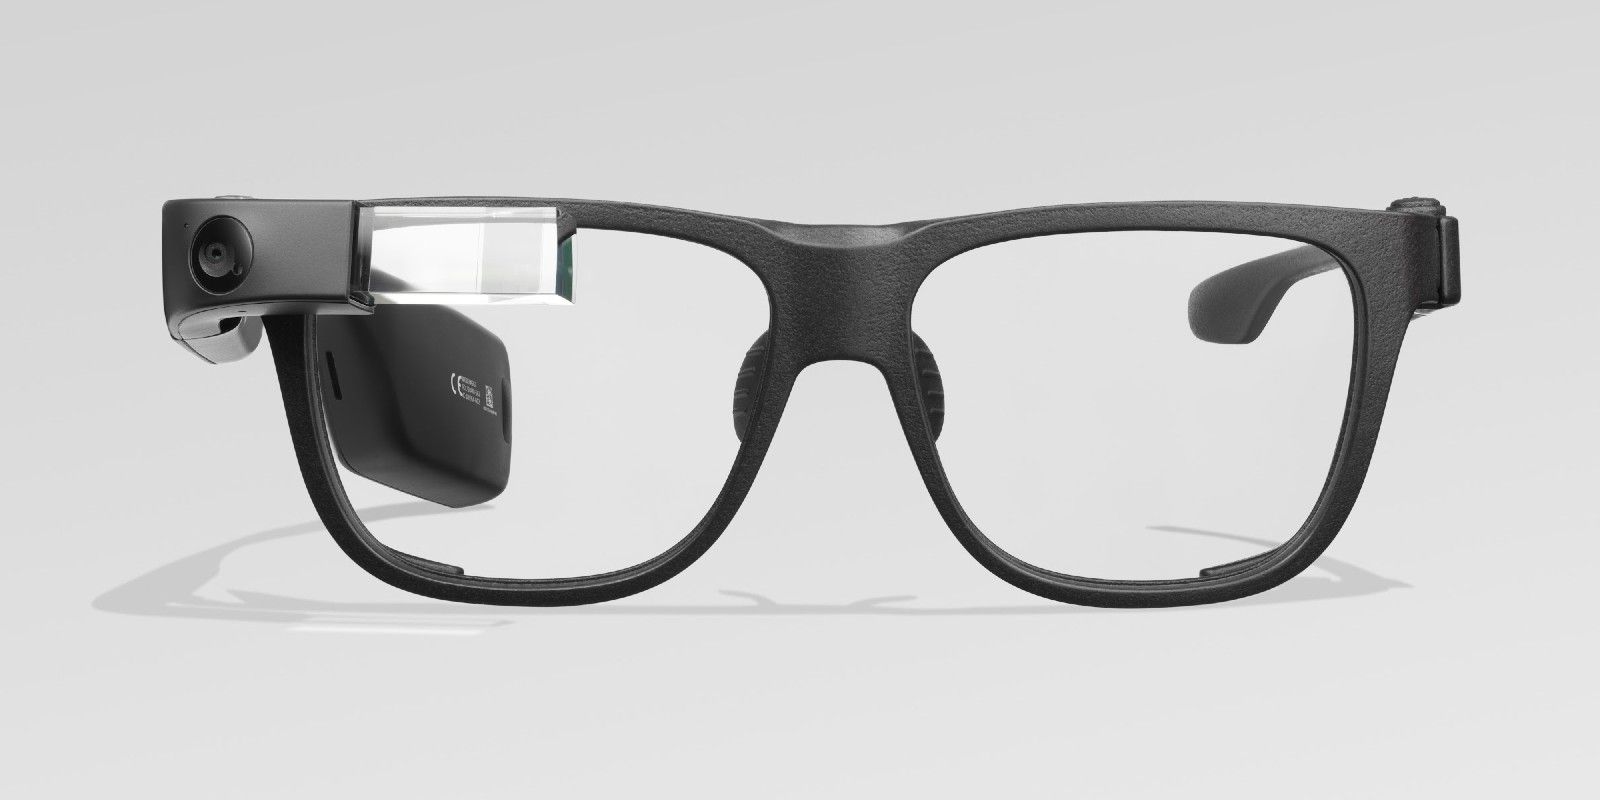 Google AR Headset Reportedly In The Works For 2024 Release Date